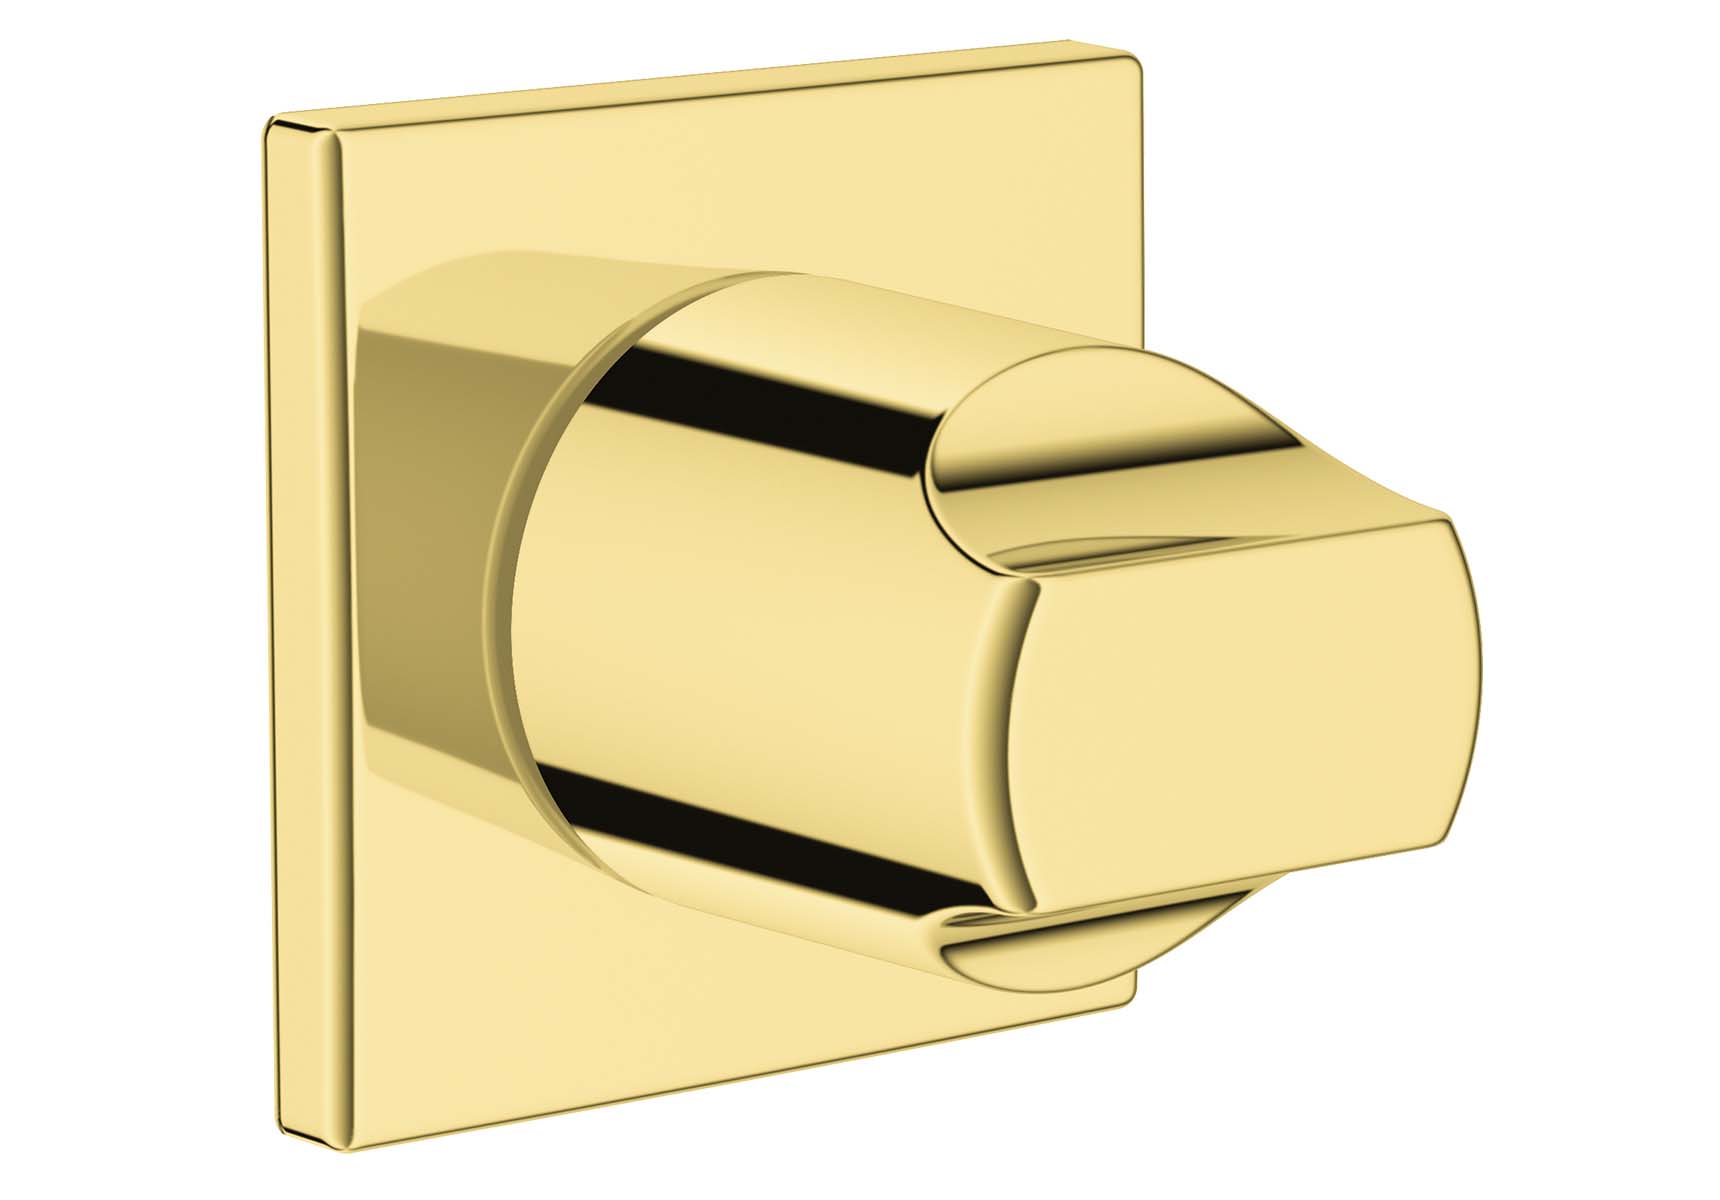 Suit Built-In Stop Valve, Exposed Part, Gold